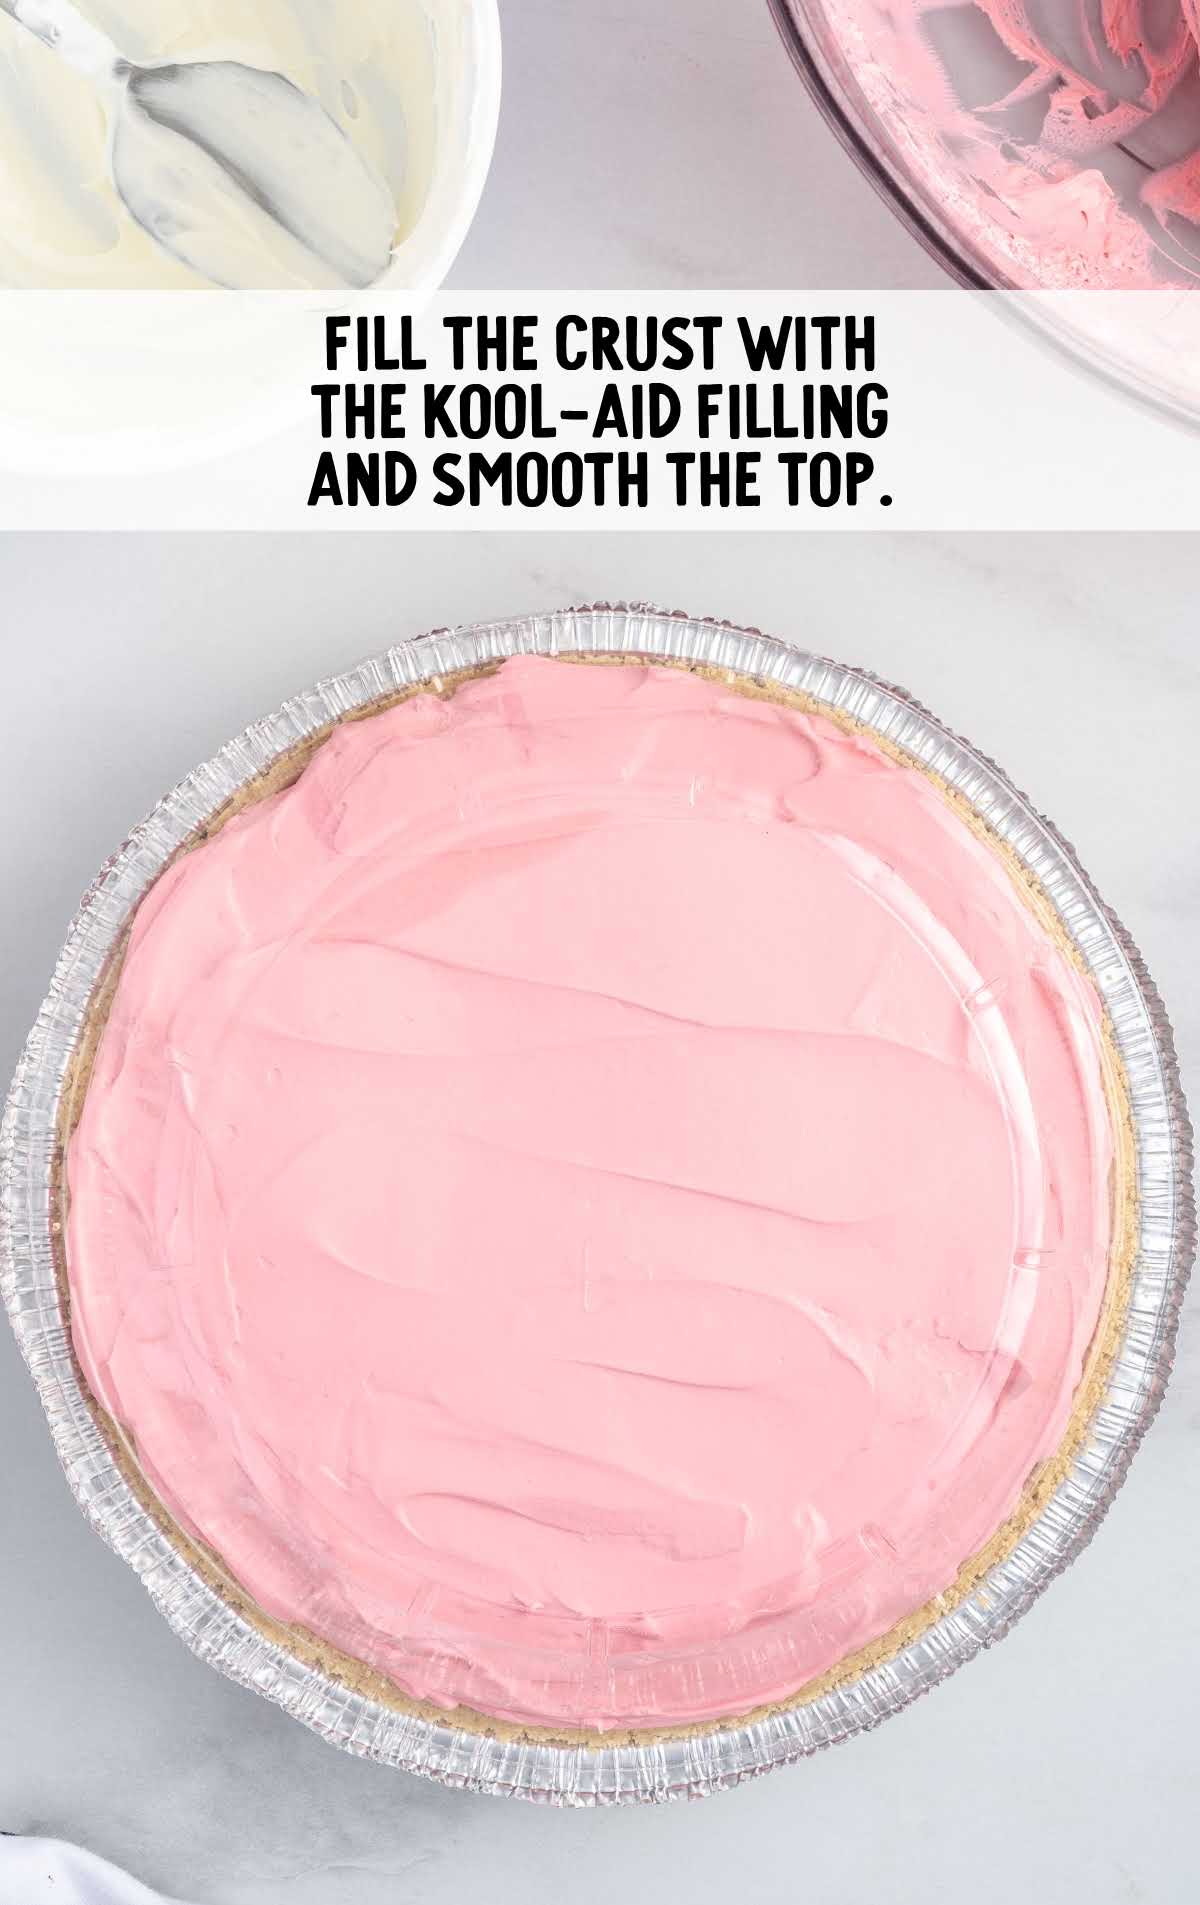 pie crust filled with kool-aid filling